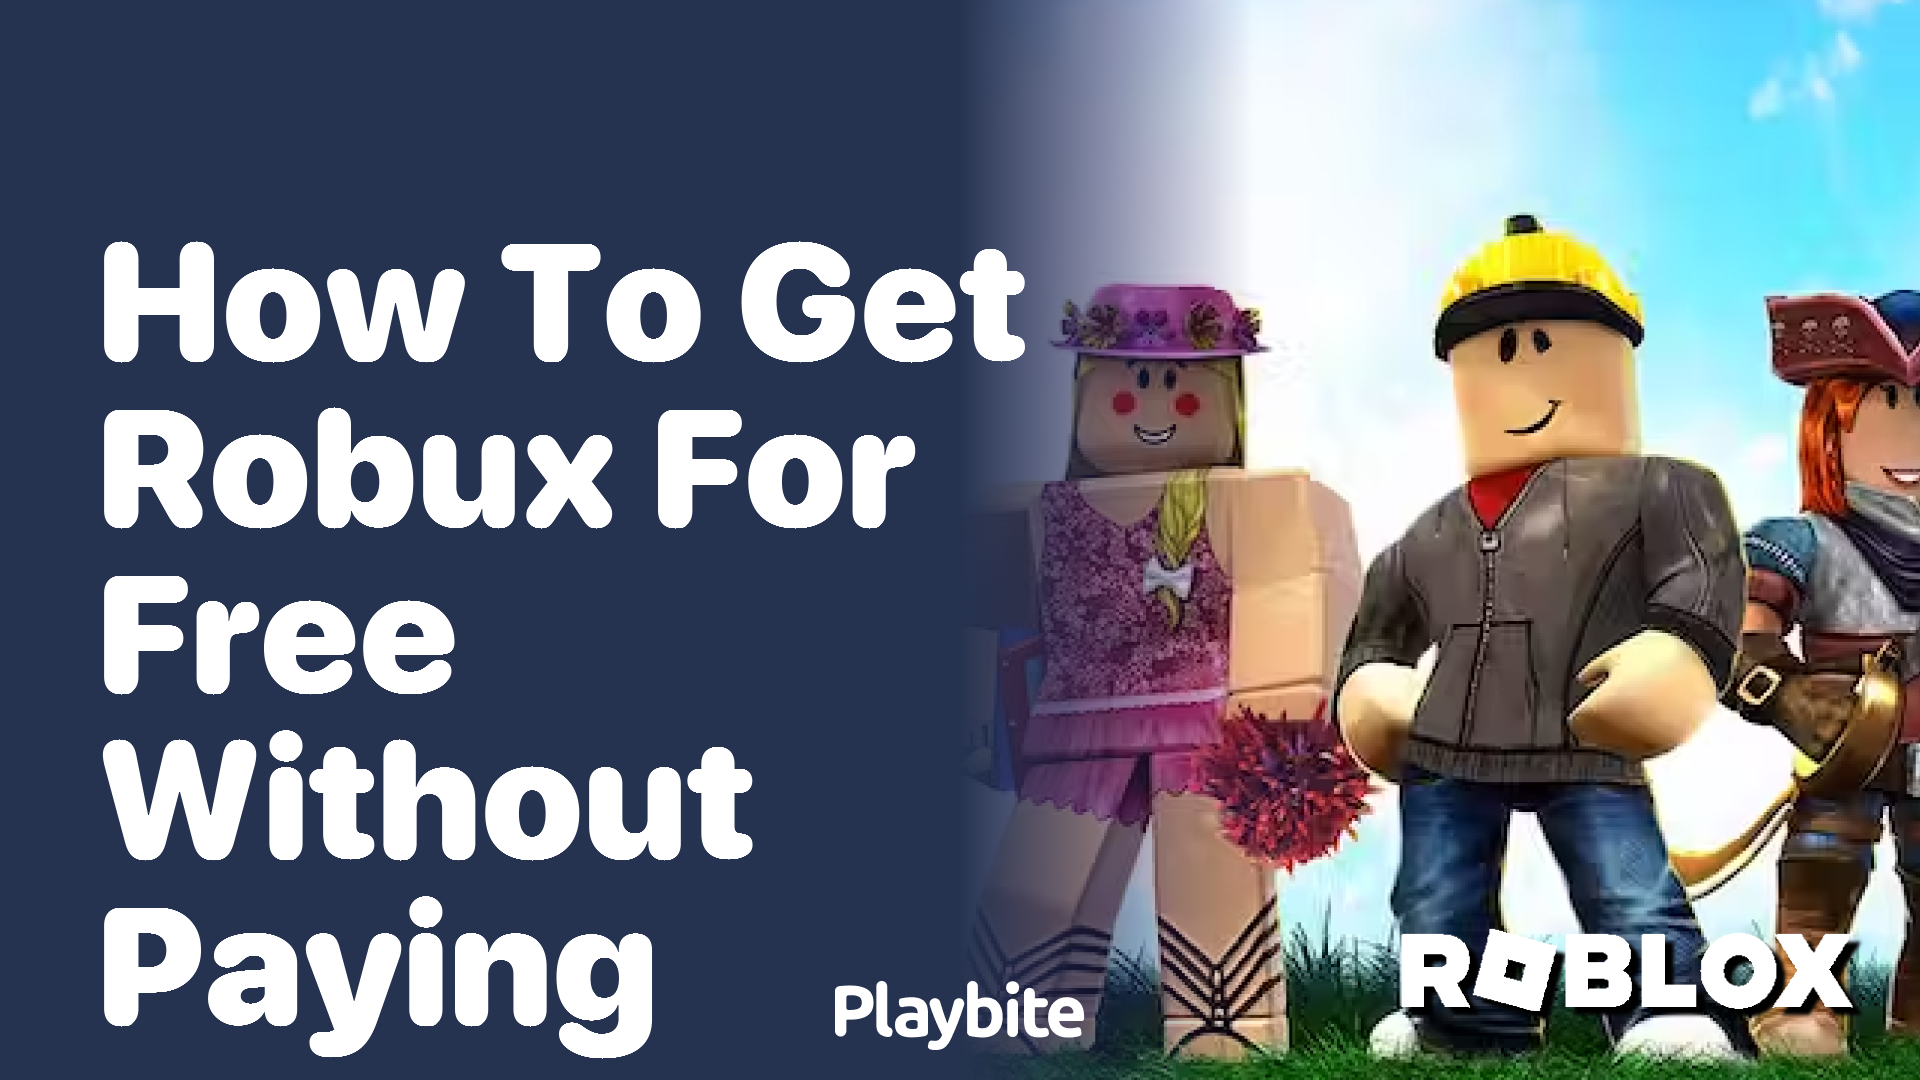 How to Get Robux for Free Without Paying